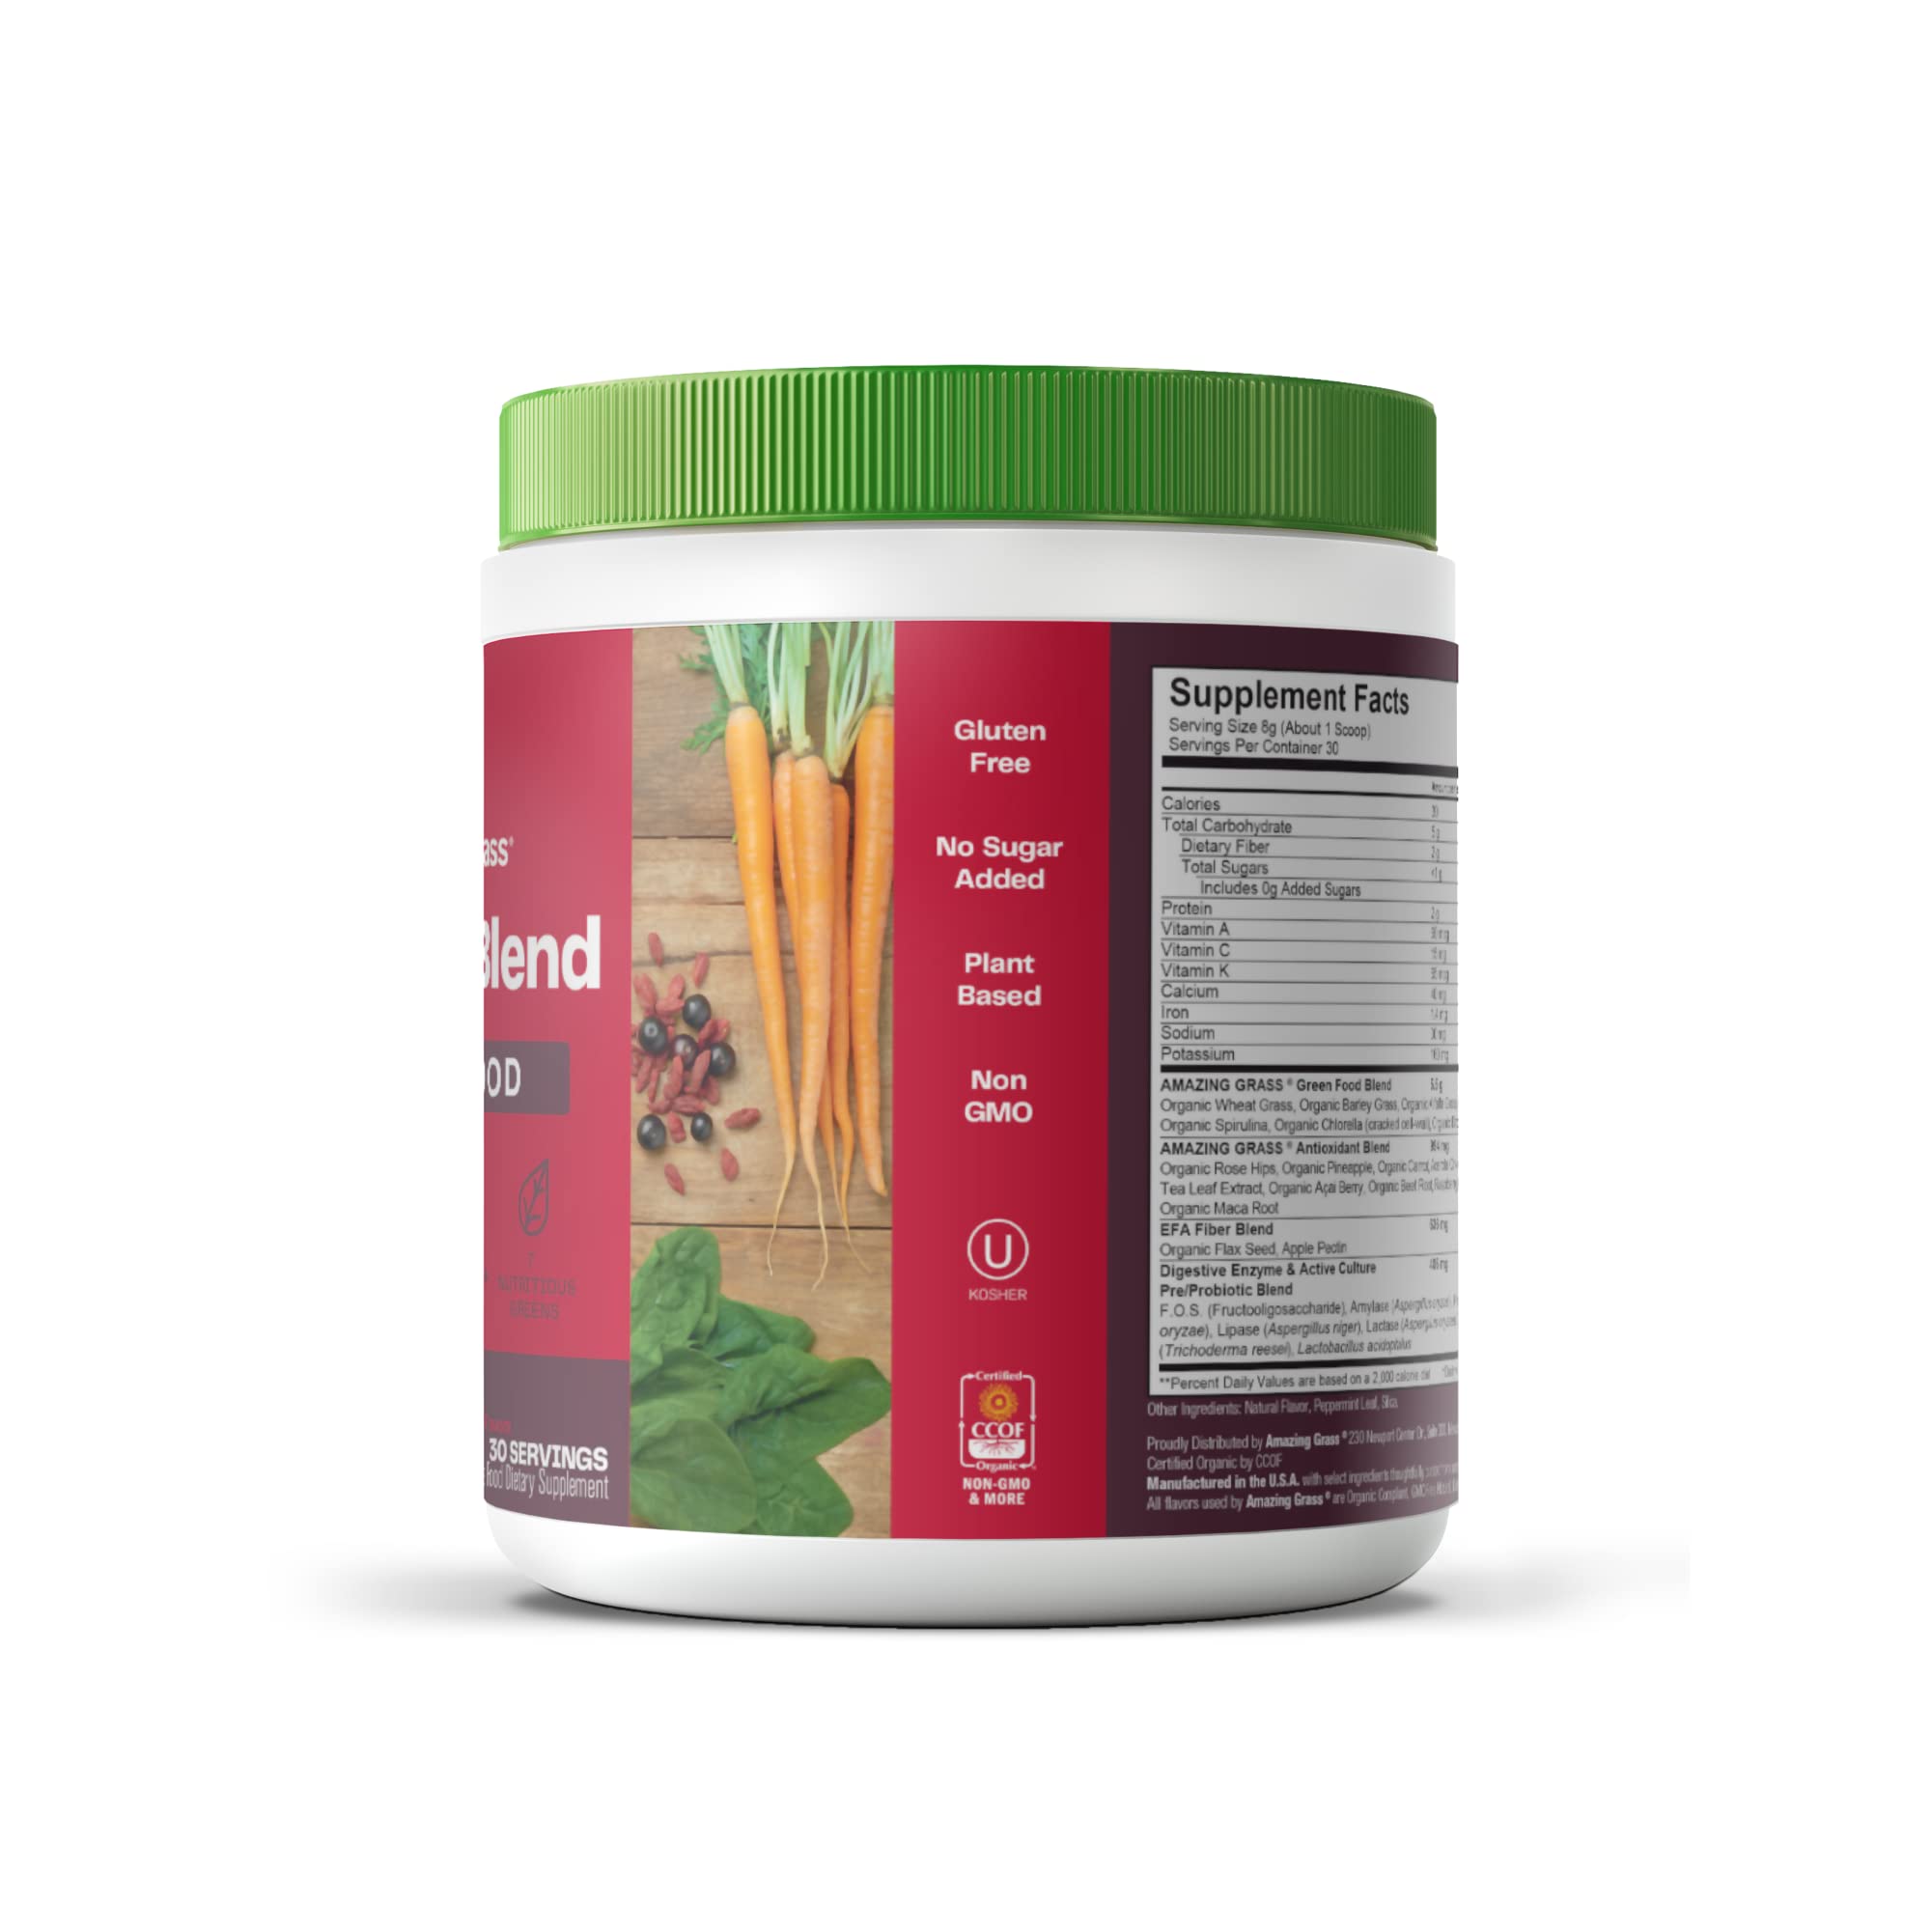 Amazing Grass Greens Blend Superfood: Super Greens Powder Smoothie Mix with Organic Spirulina & Greens Blend Superfood: Super Greens Powder Smoothie Mix for Boost Energy